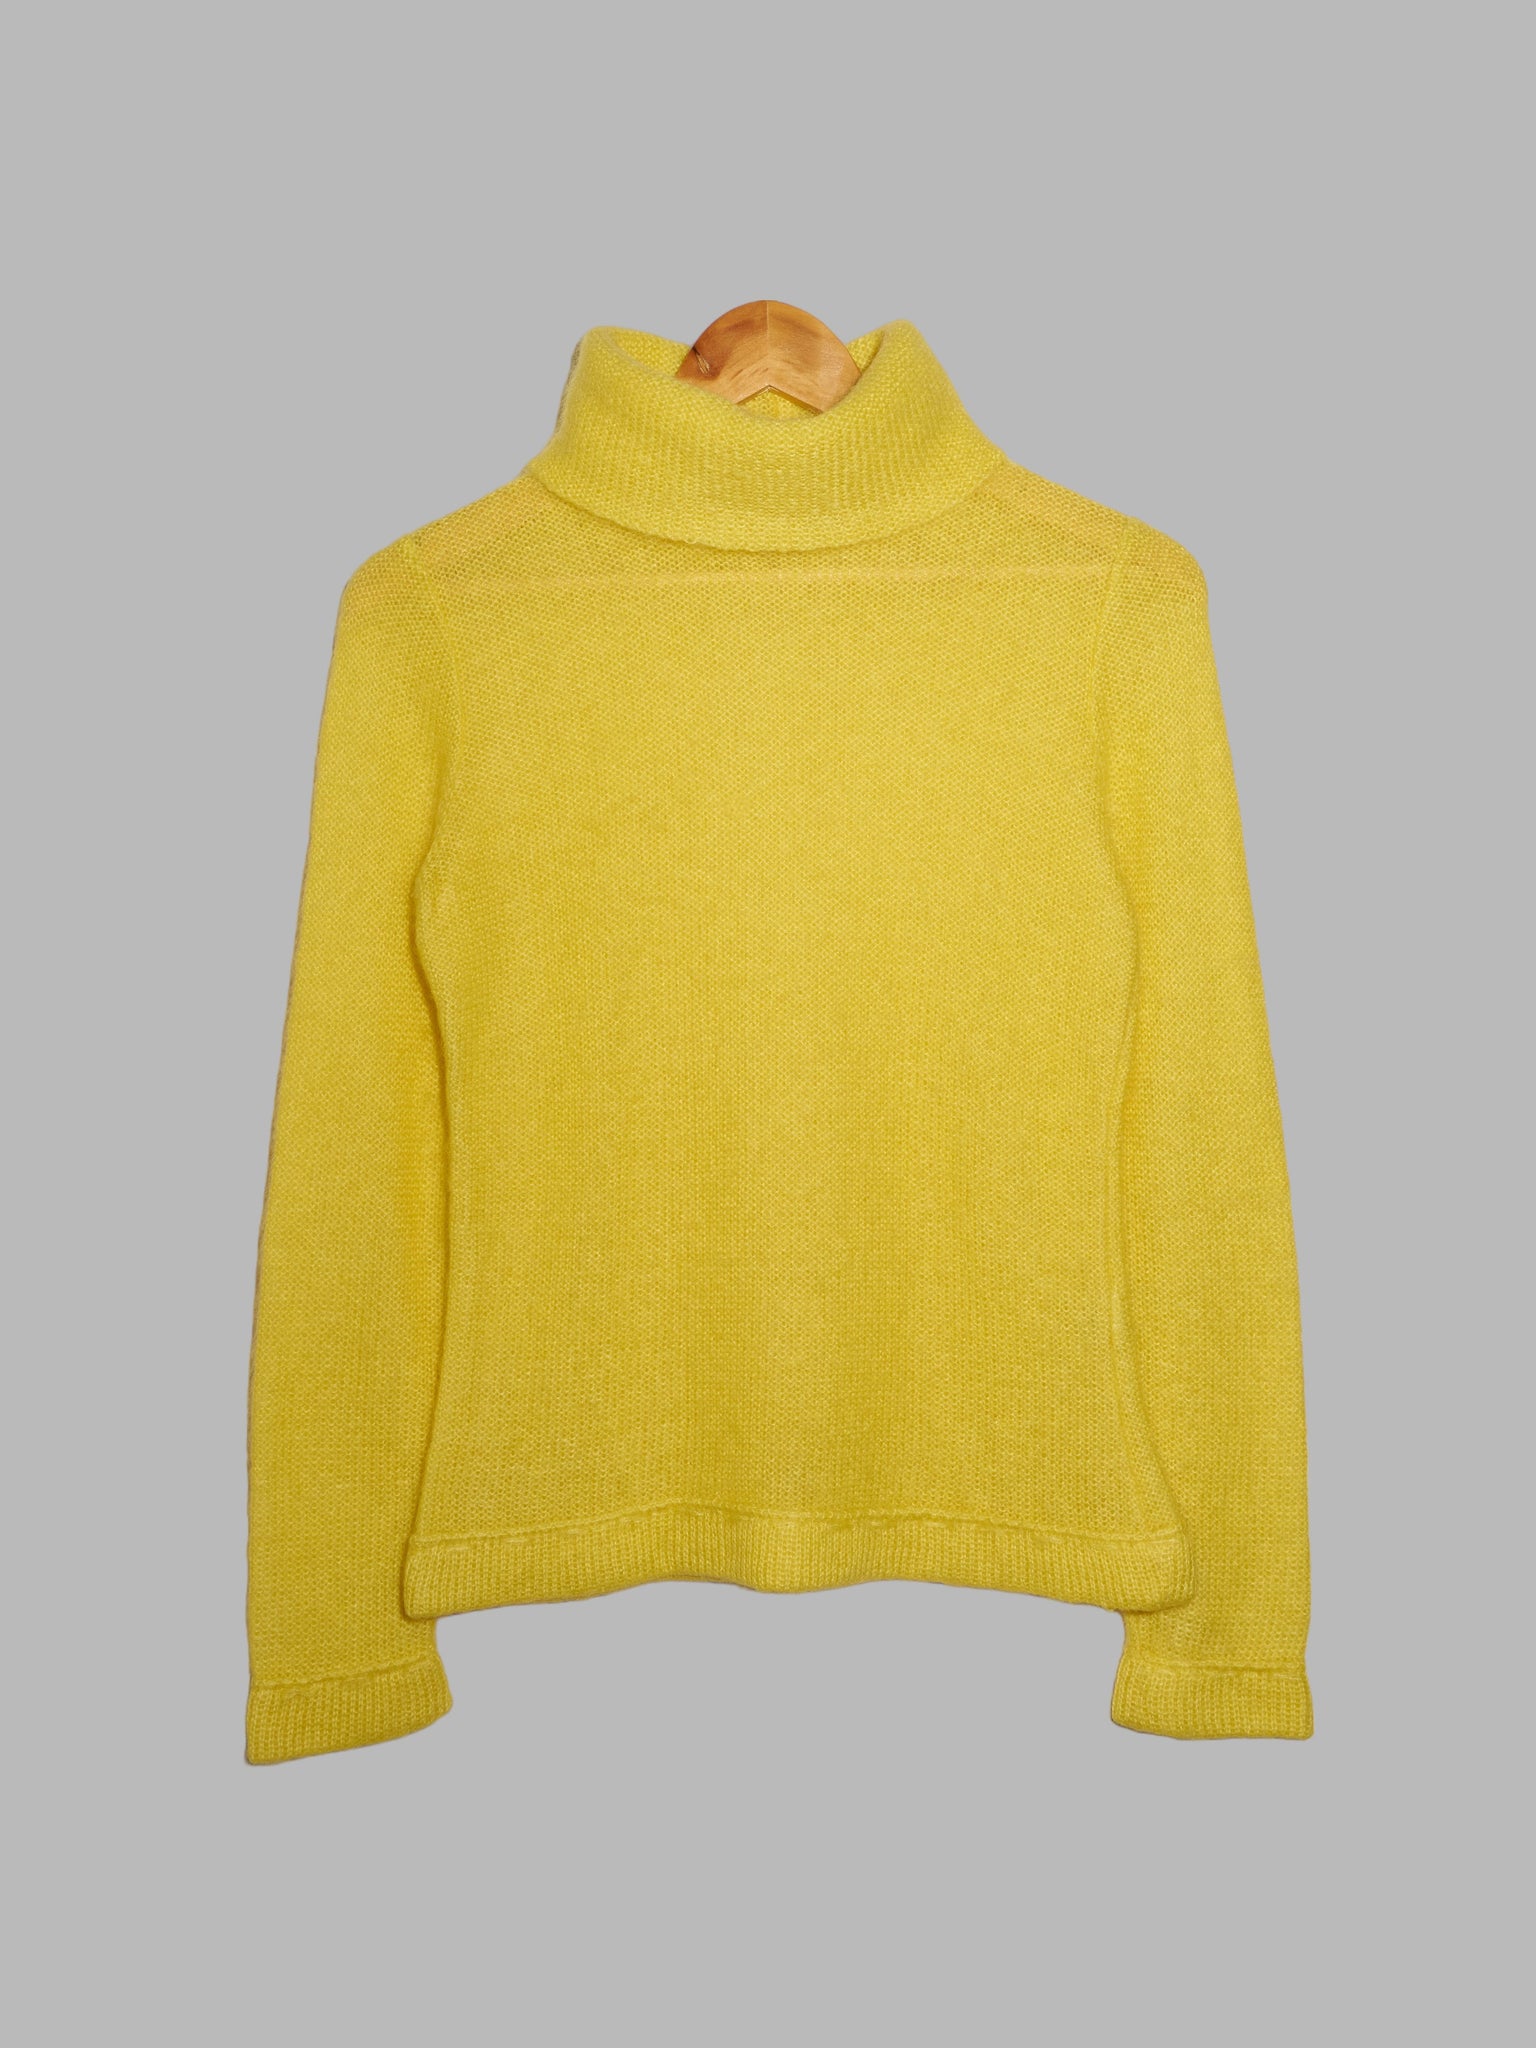 aa milano by Alessandro Dell'acqua yellow mohair turtleneck jumper